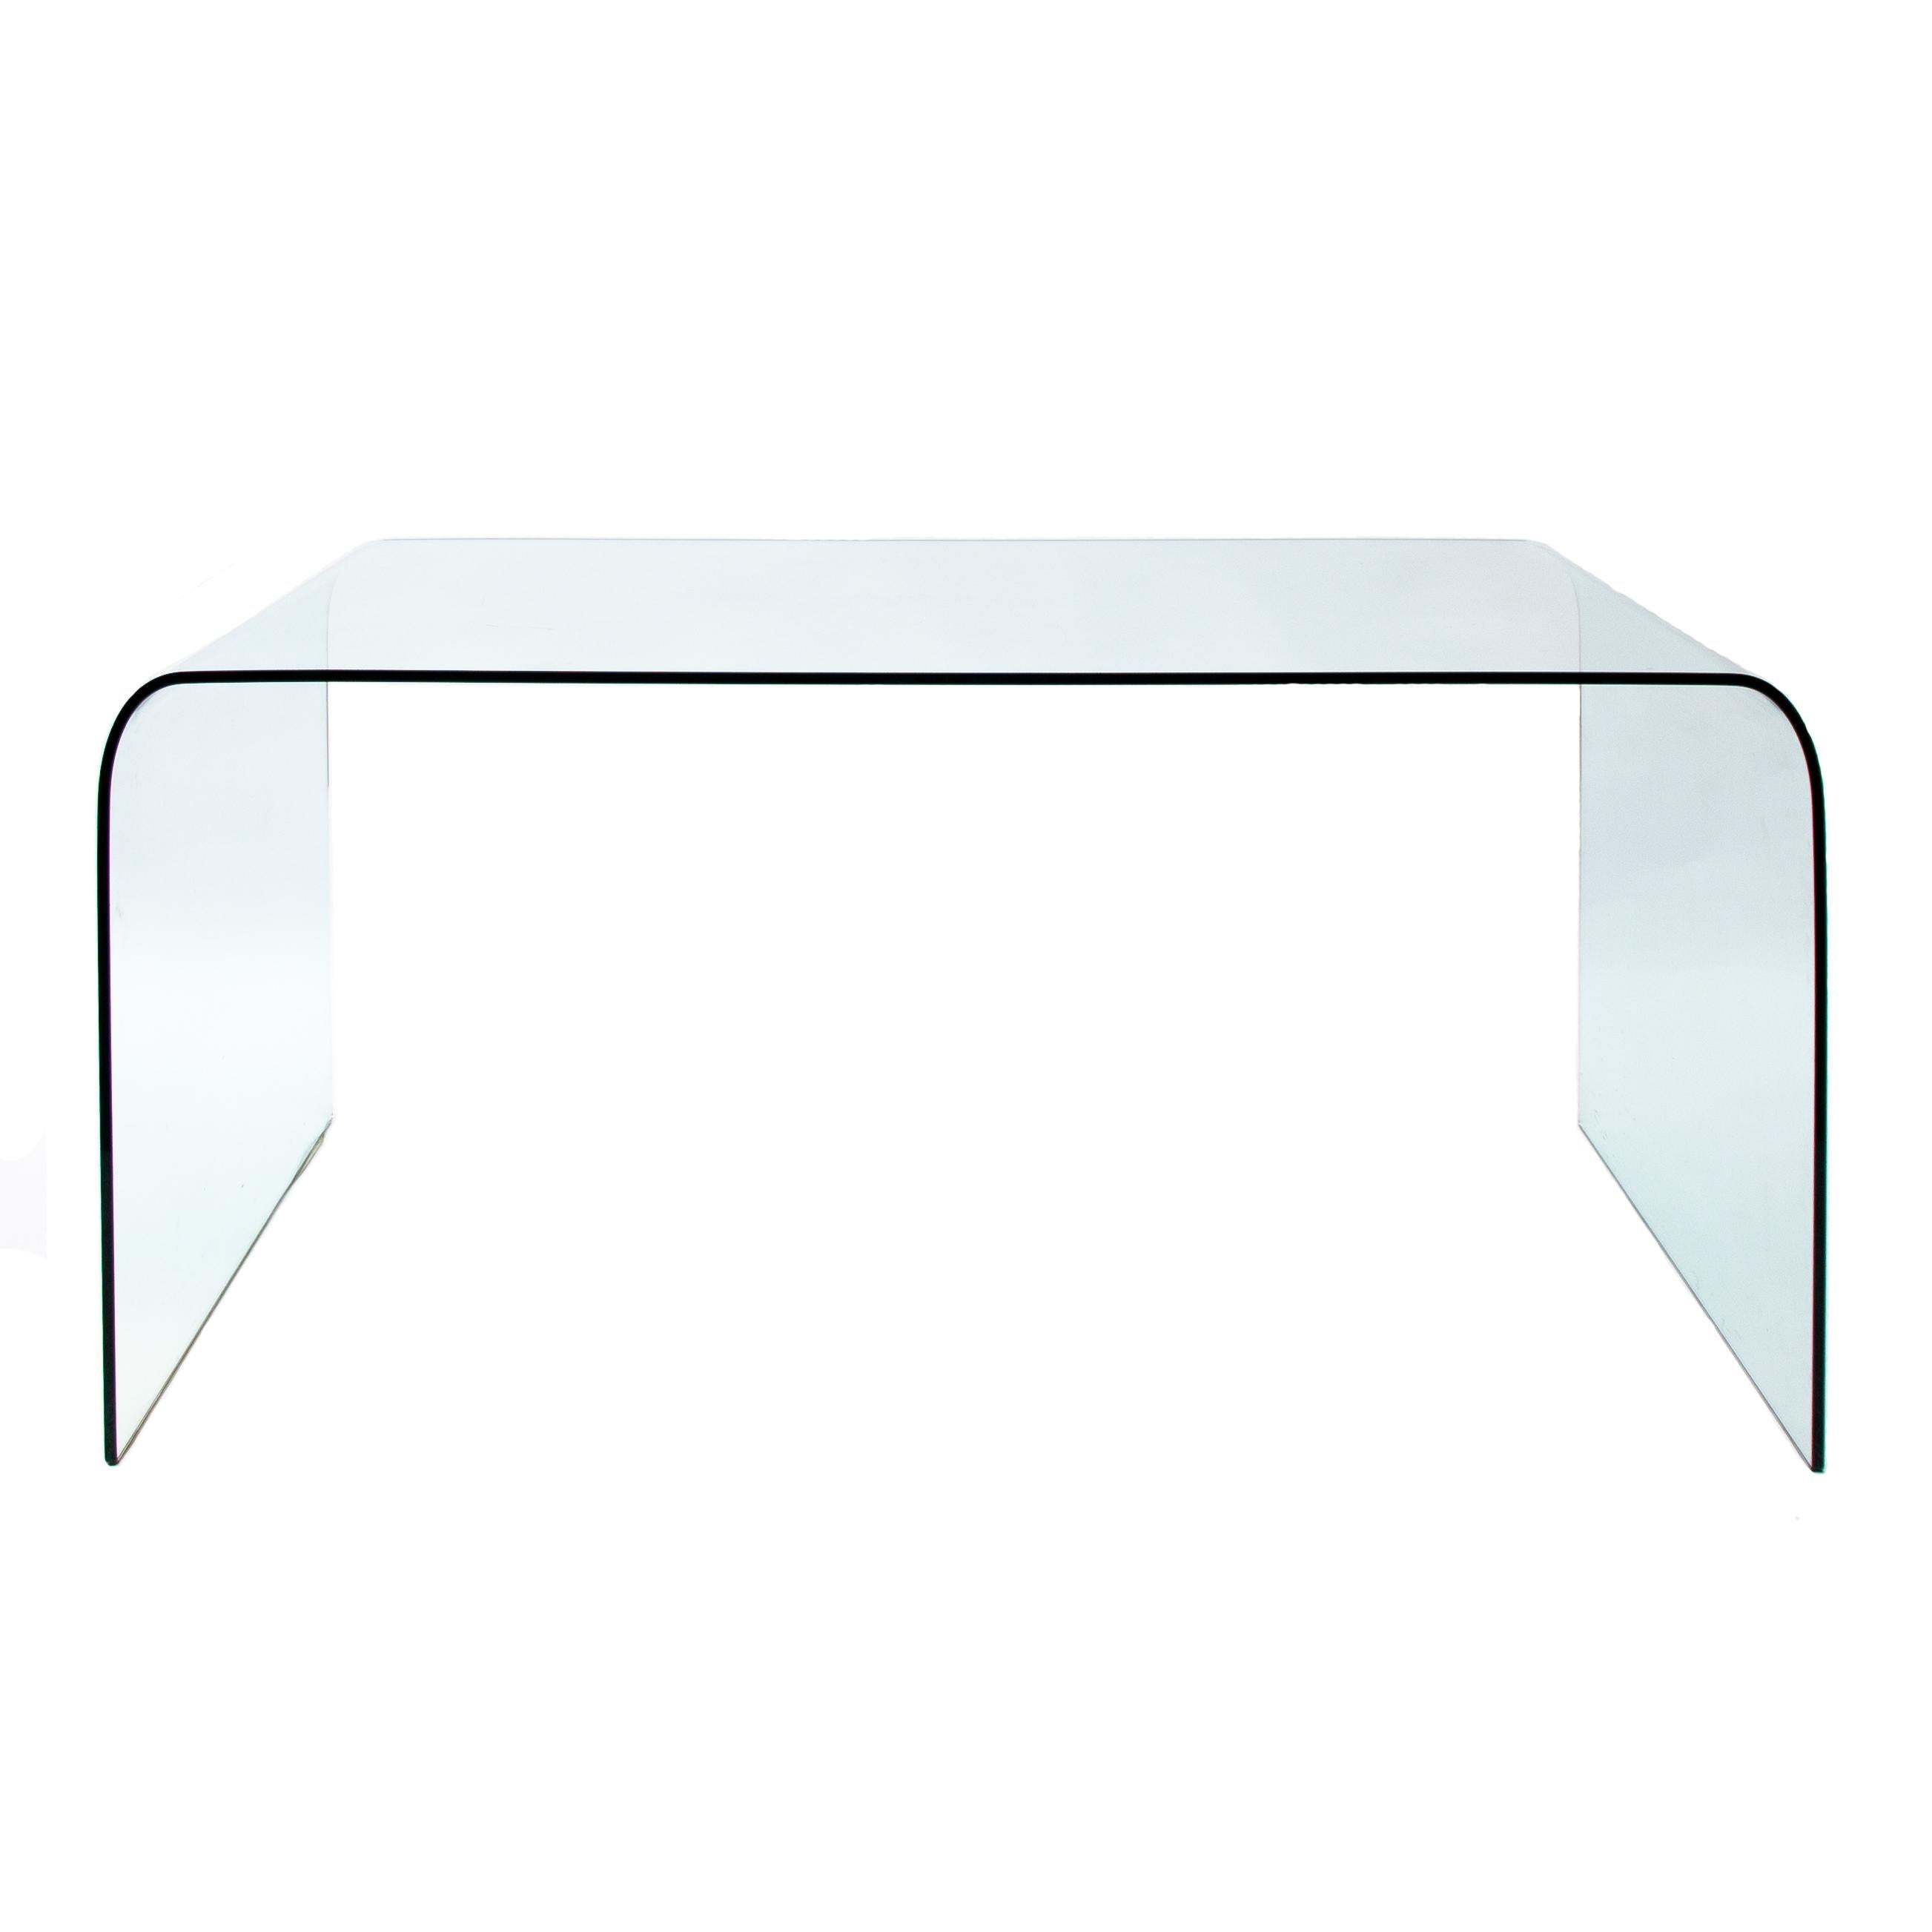 Stylish and elegant in design! The table is crafted from 15 mm thick monolithic curved glass.